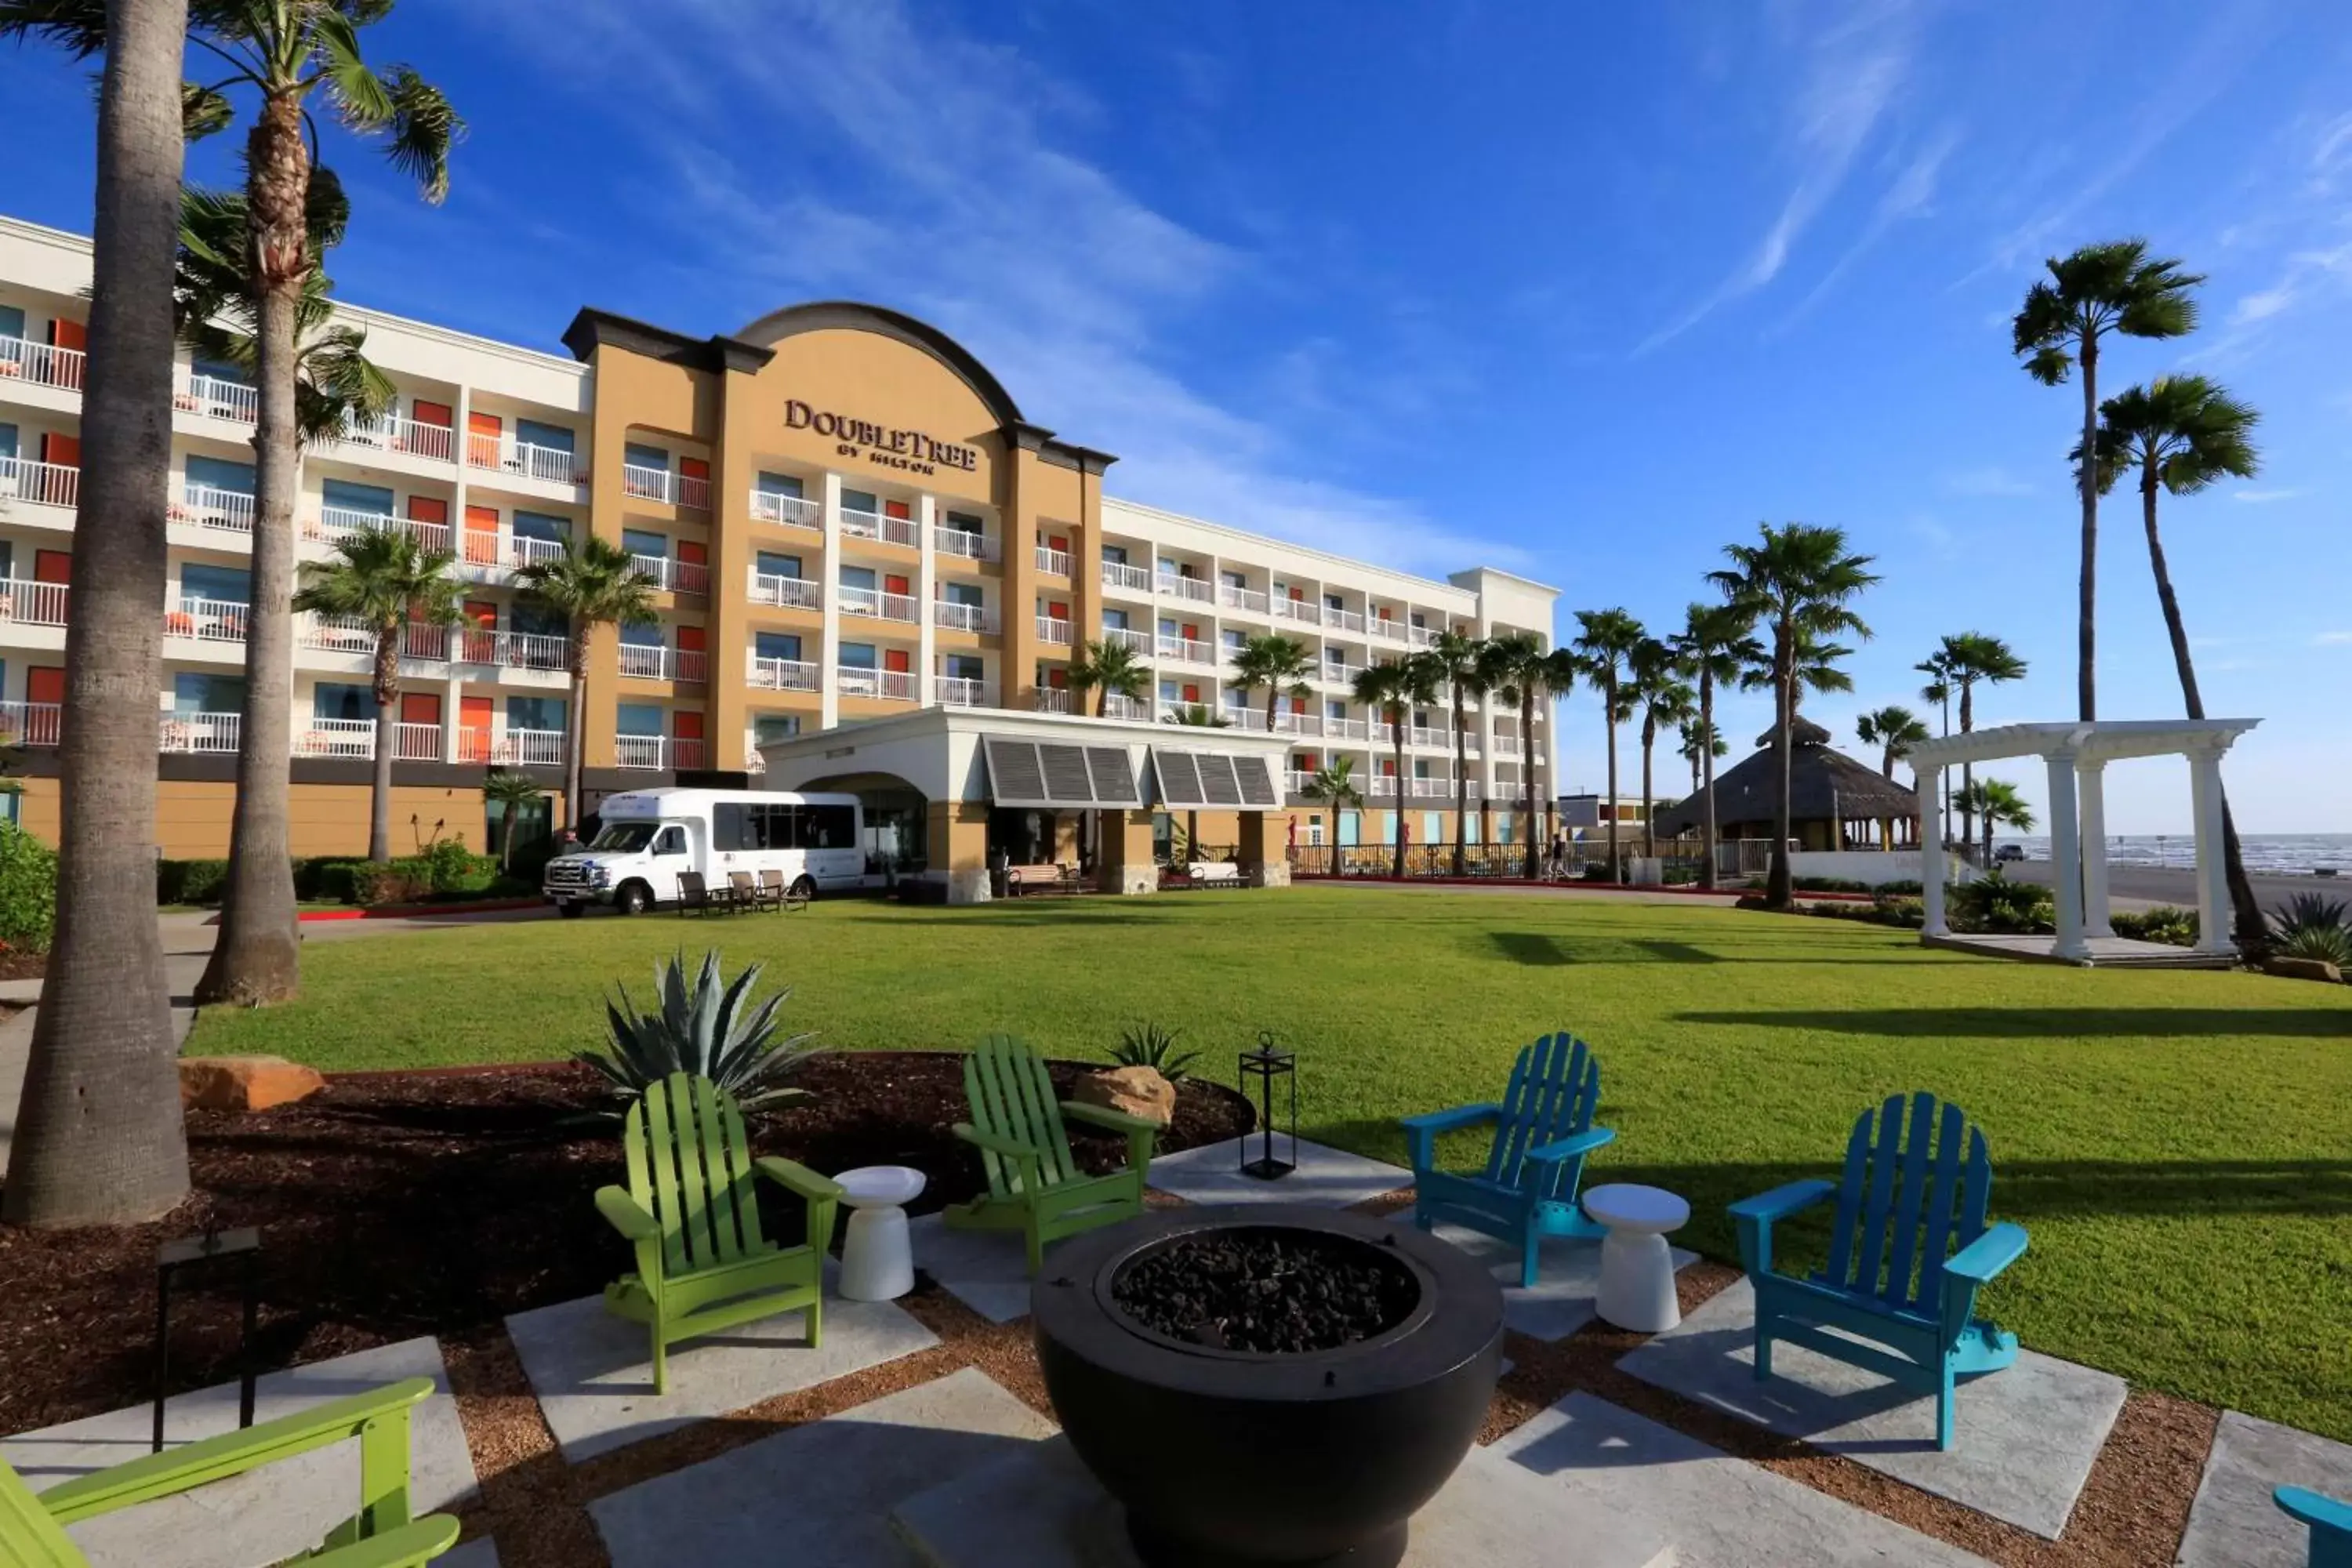 Property building in DoubleTree by Hilton Galveston Beach